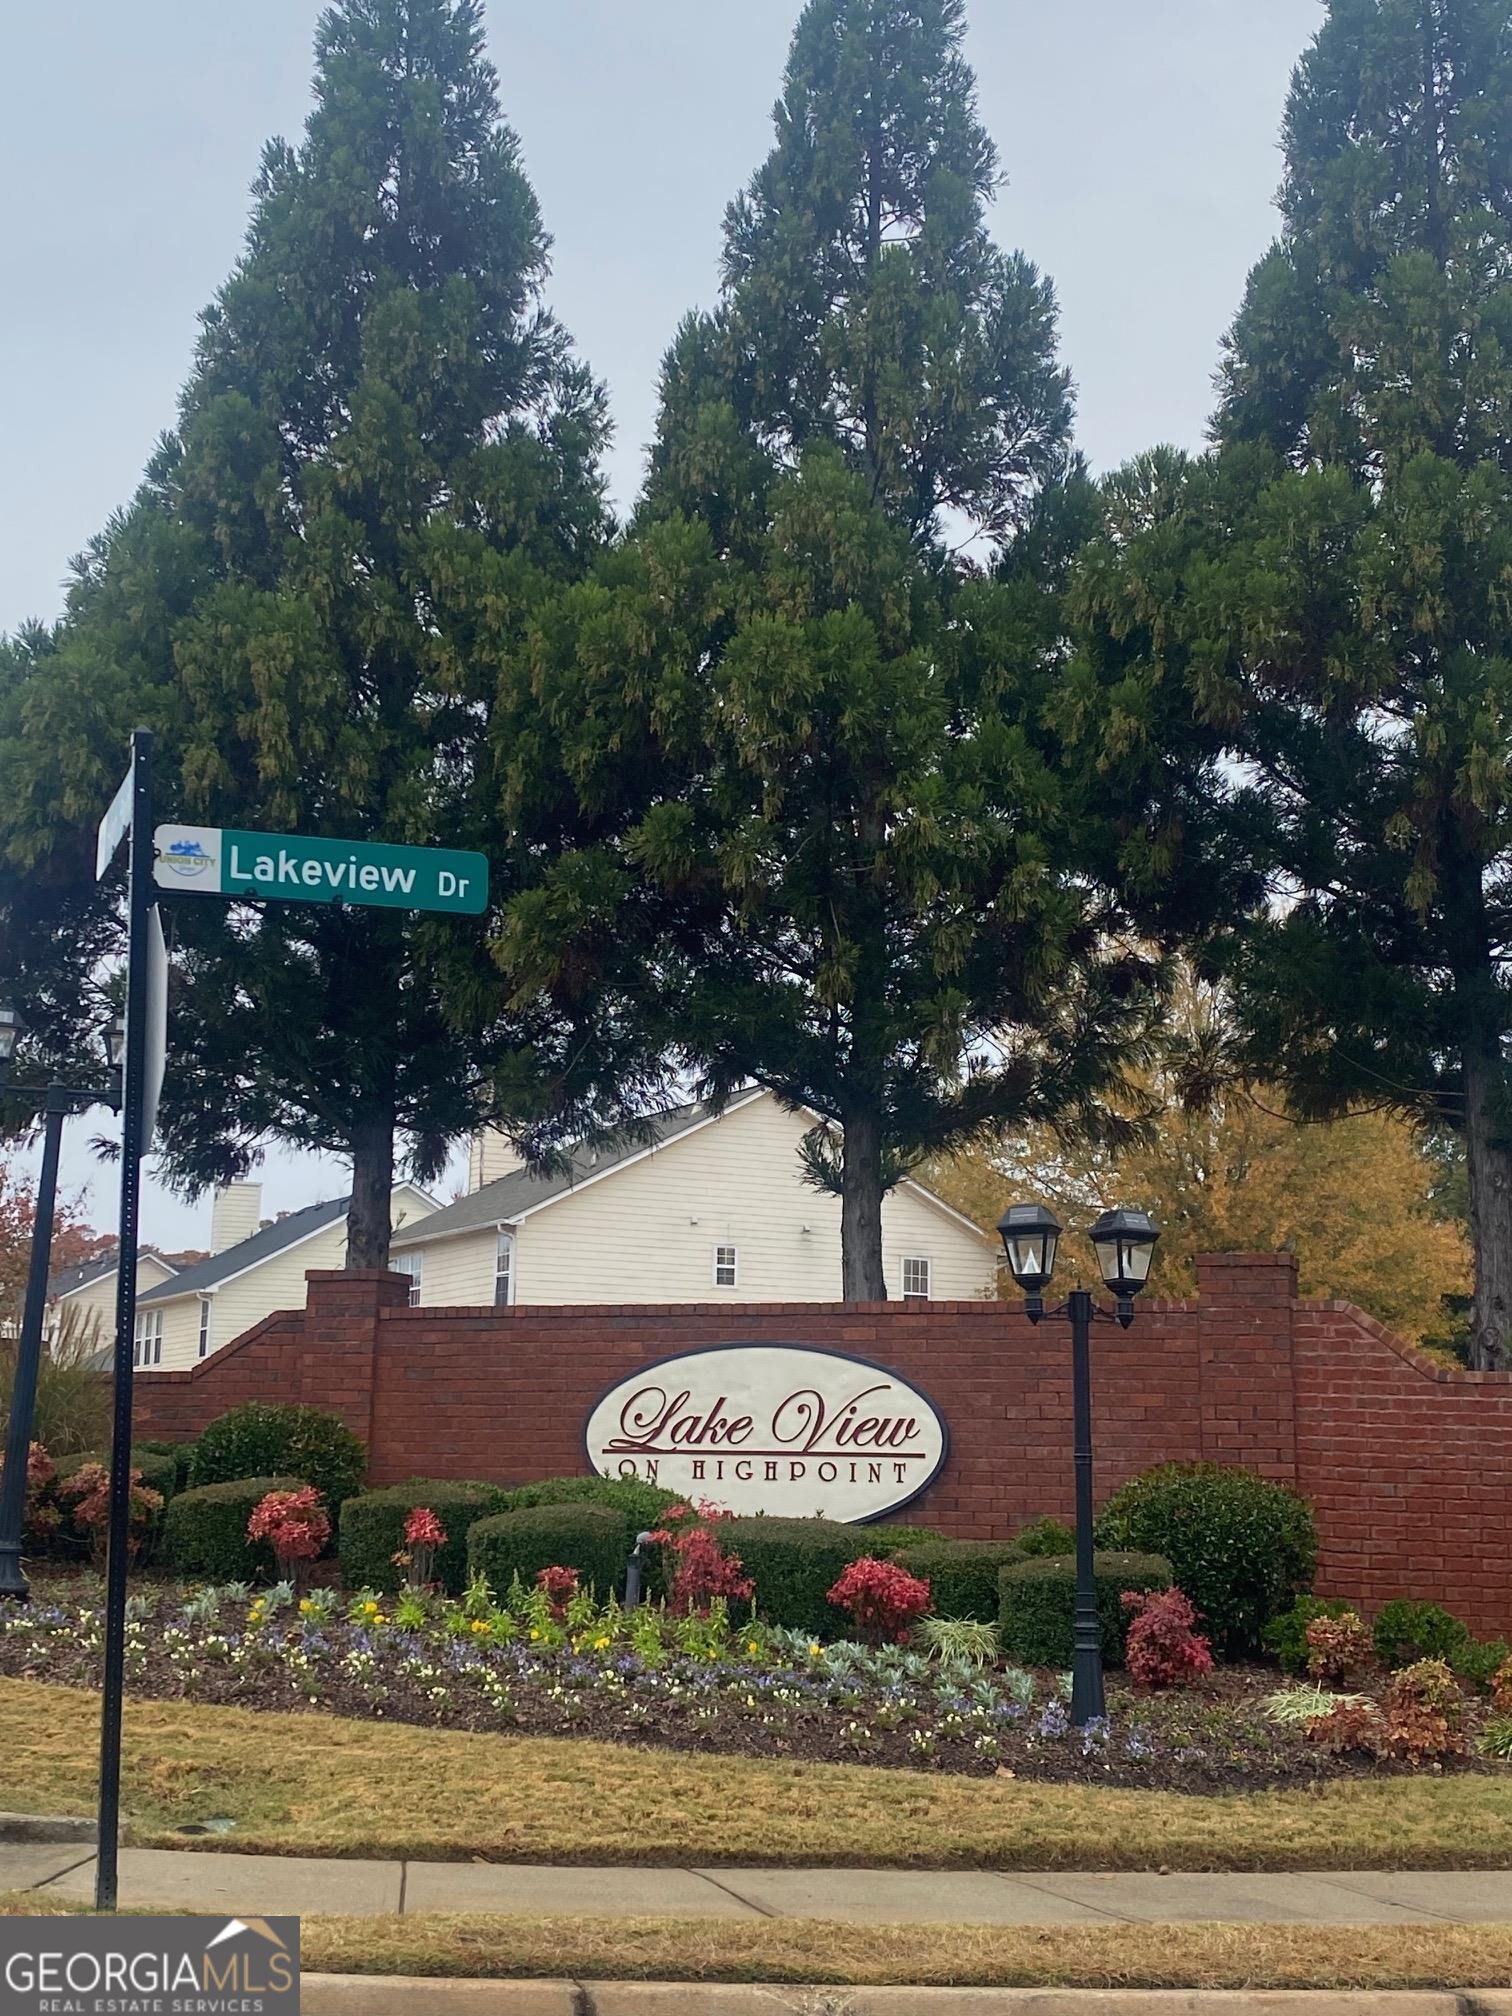 a view of a sign in a yard with large trees